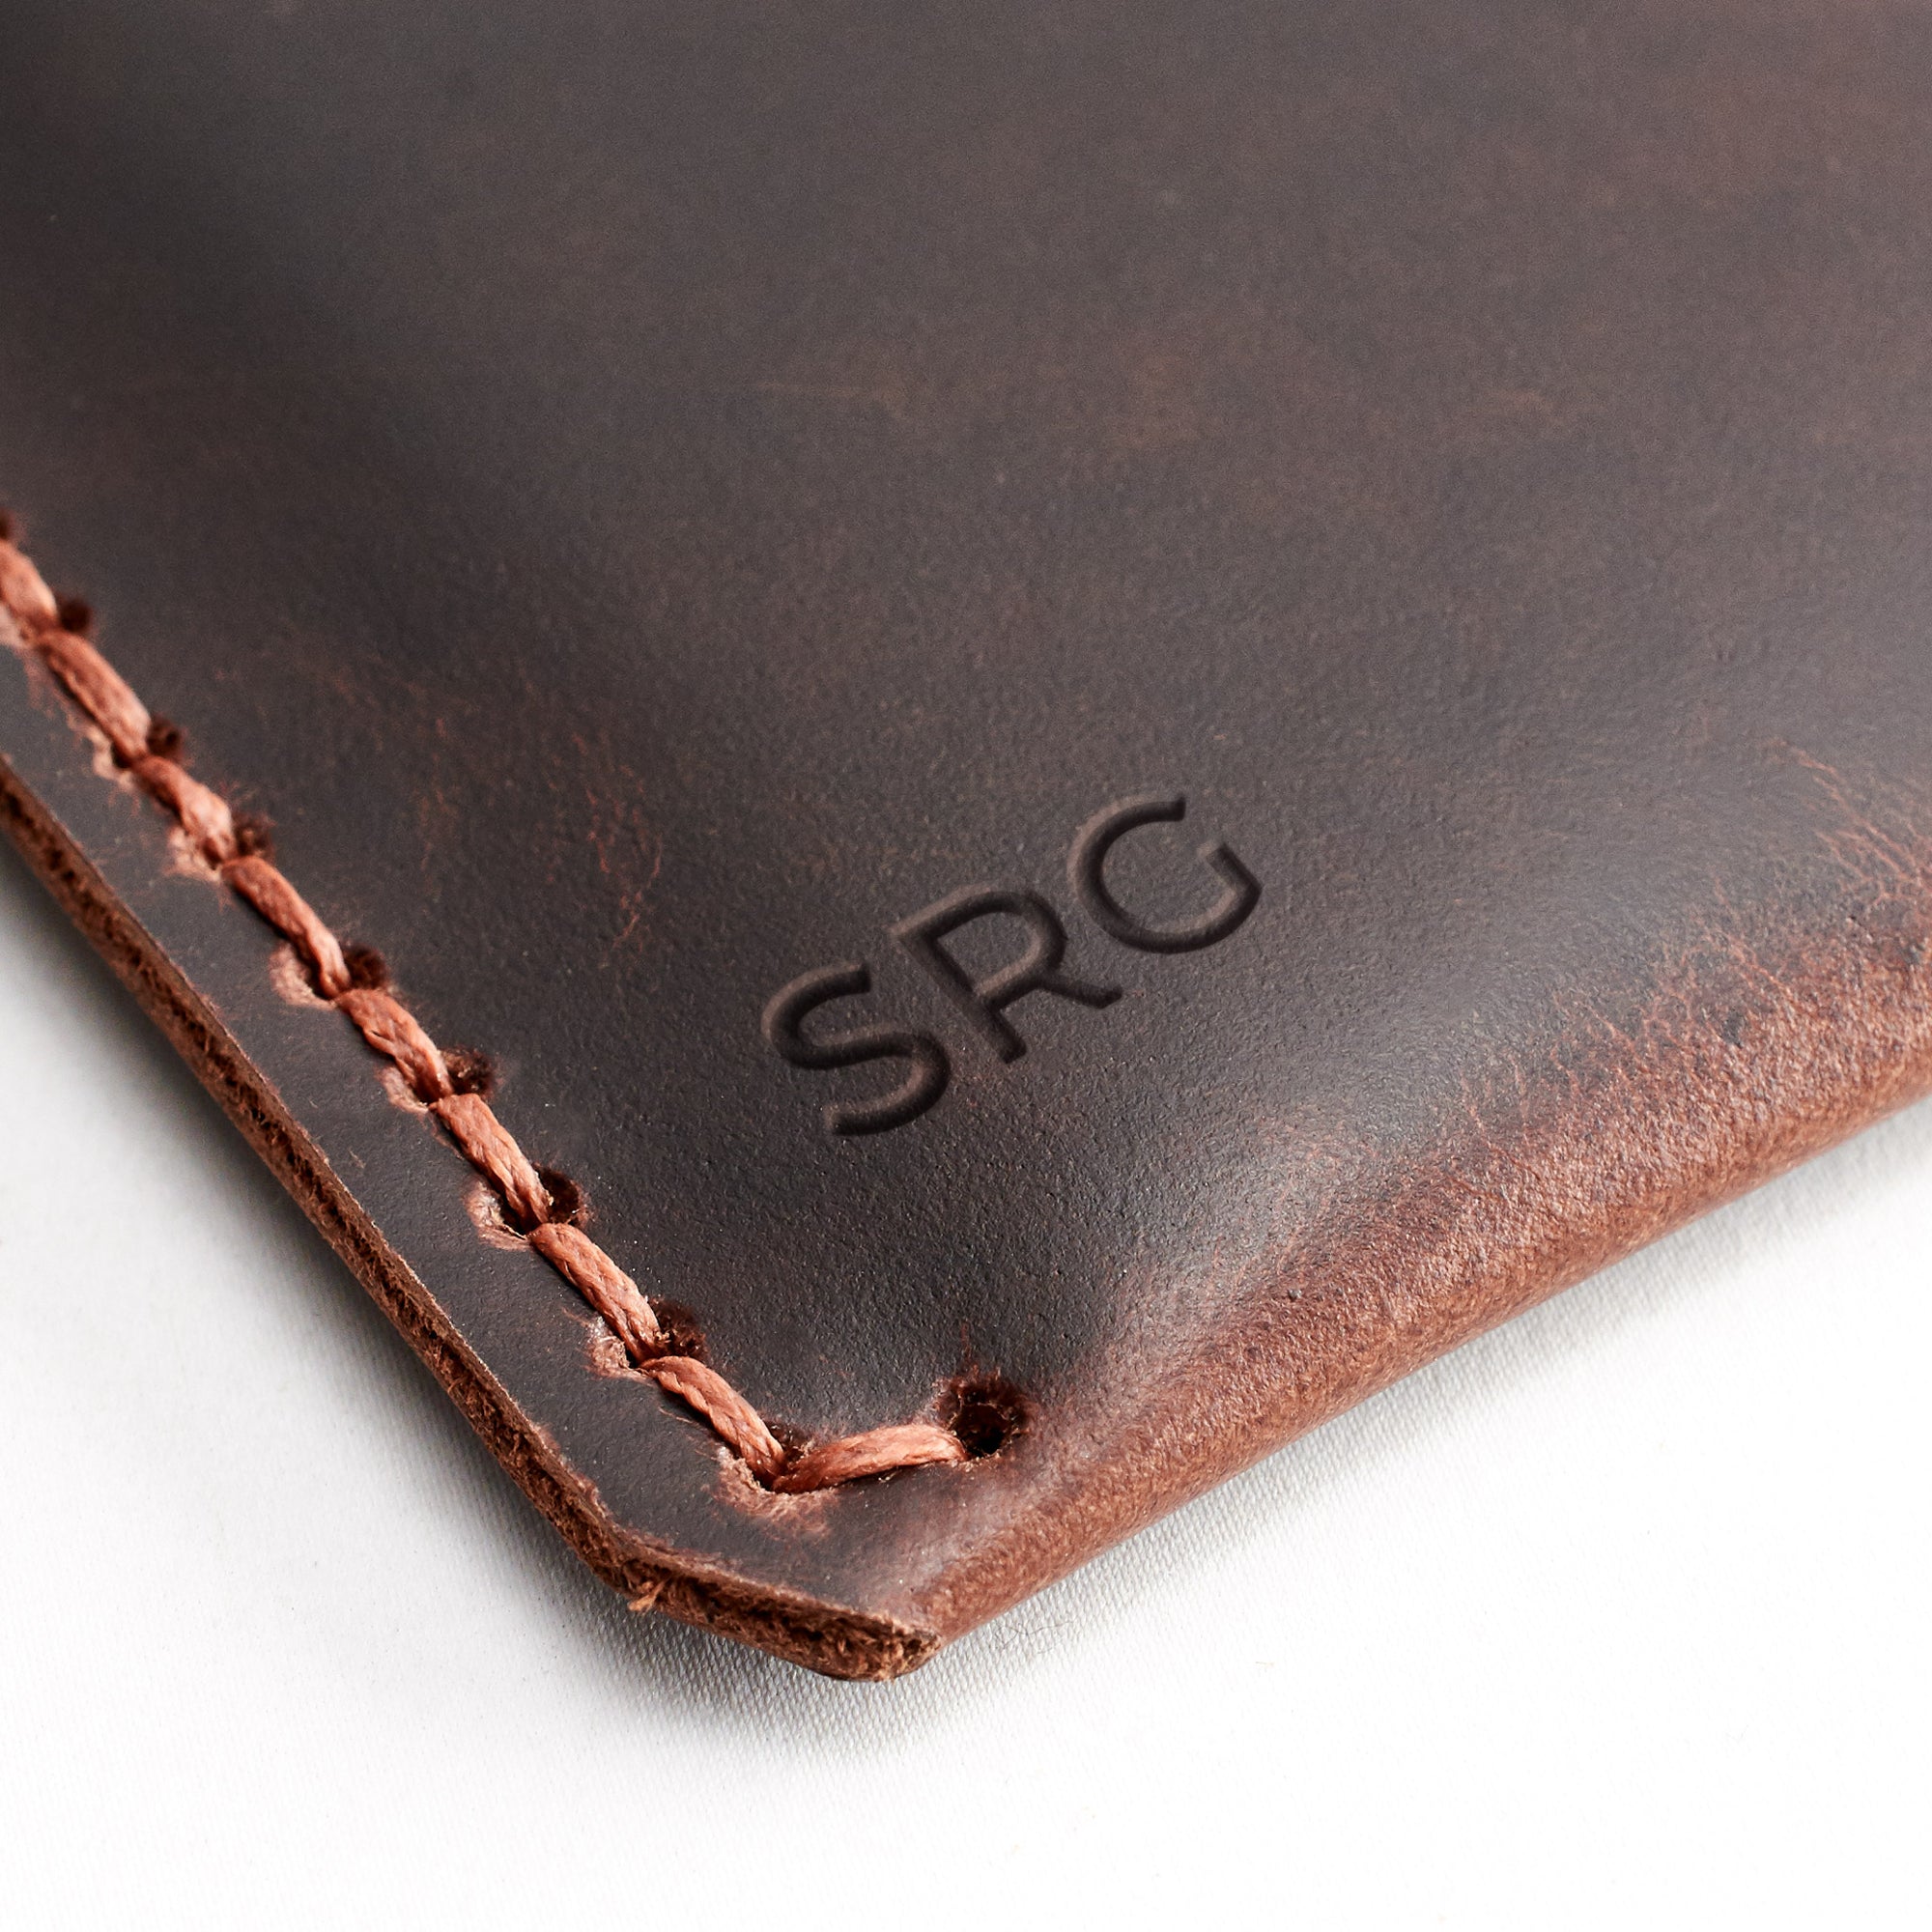 Custom monogram engraving. Red brown leather sleeve for ASUS Zenbook Pro Duo. Mens gifts